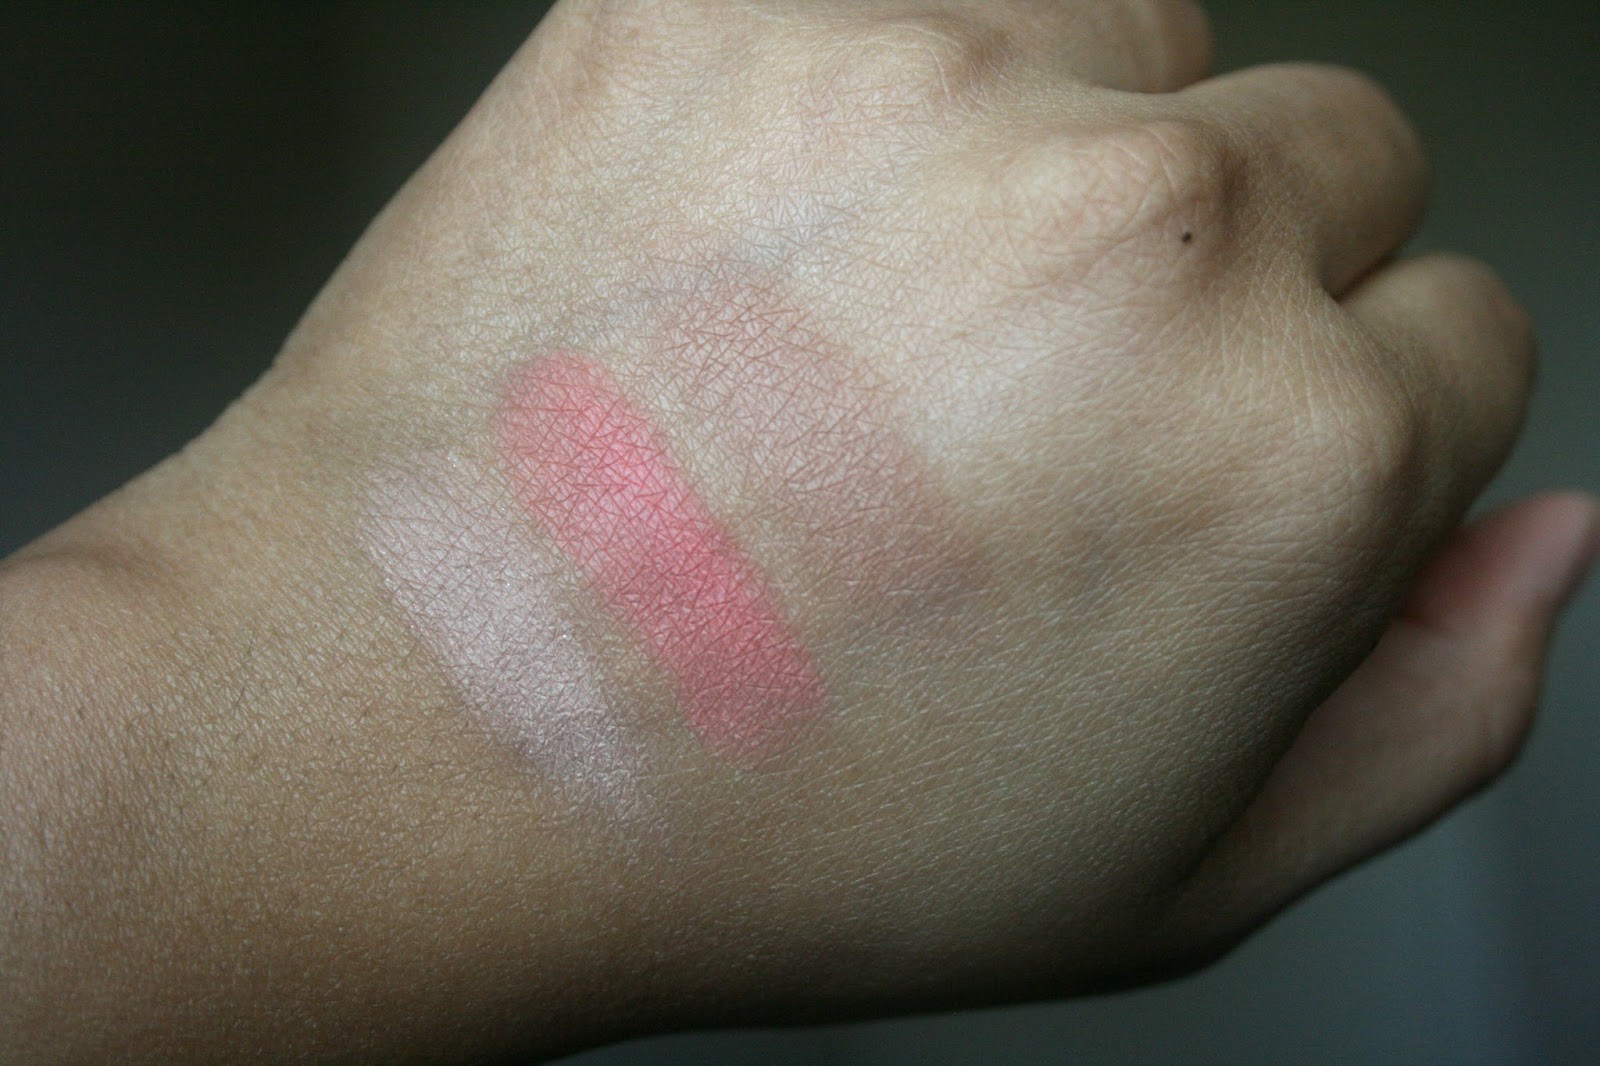 IT Cosmetics CC+ Radiance Palette and Heavenly Luxe Wand Ball Brush Review, Photos & Swatches